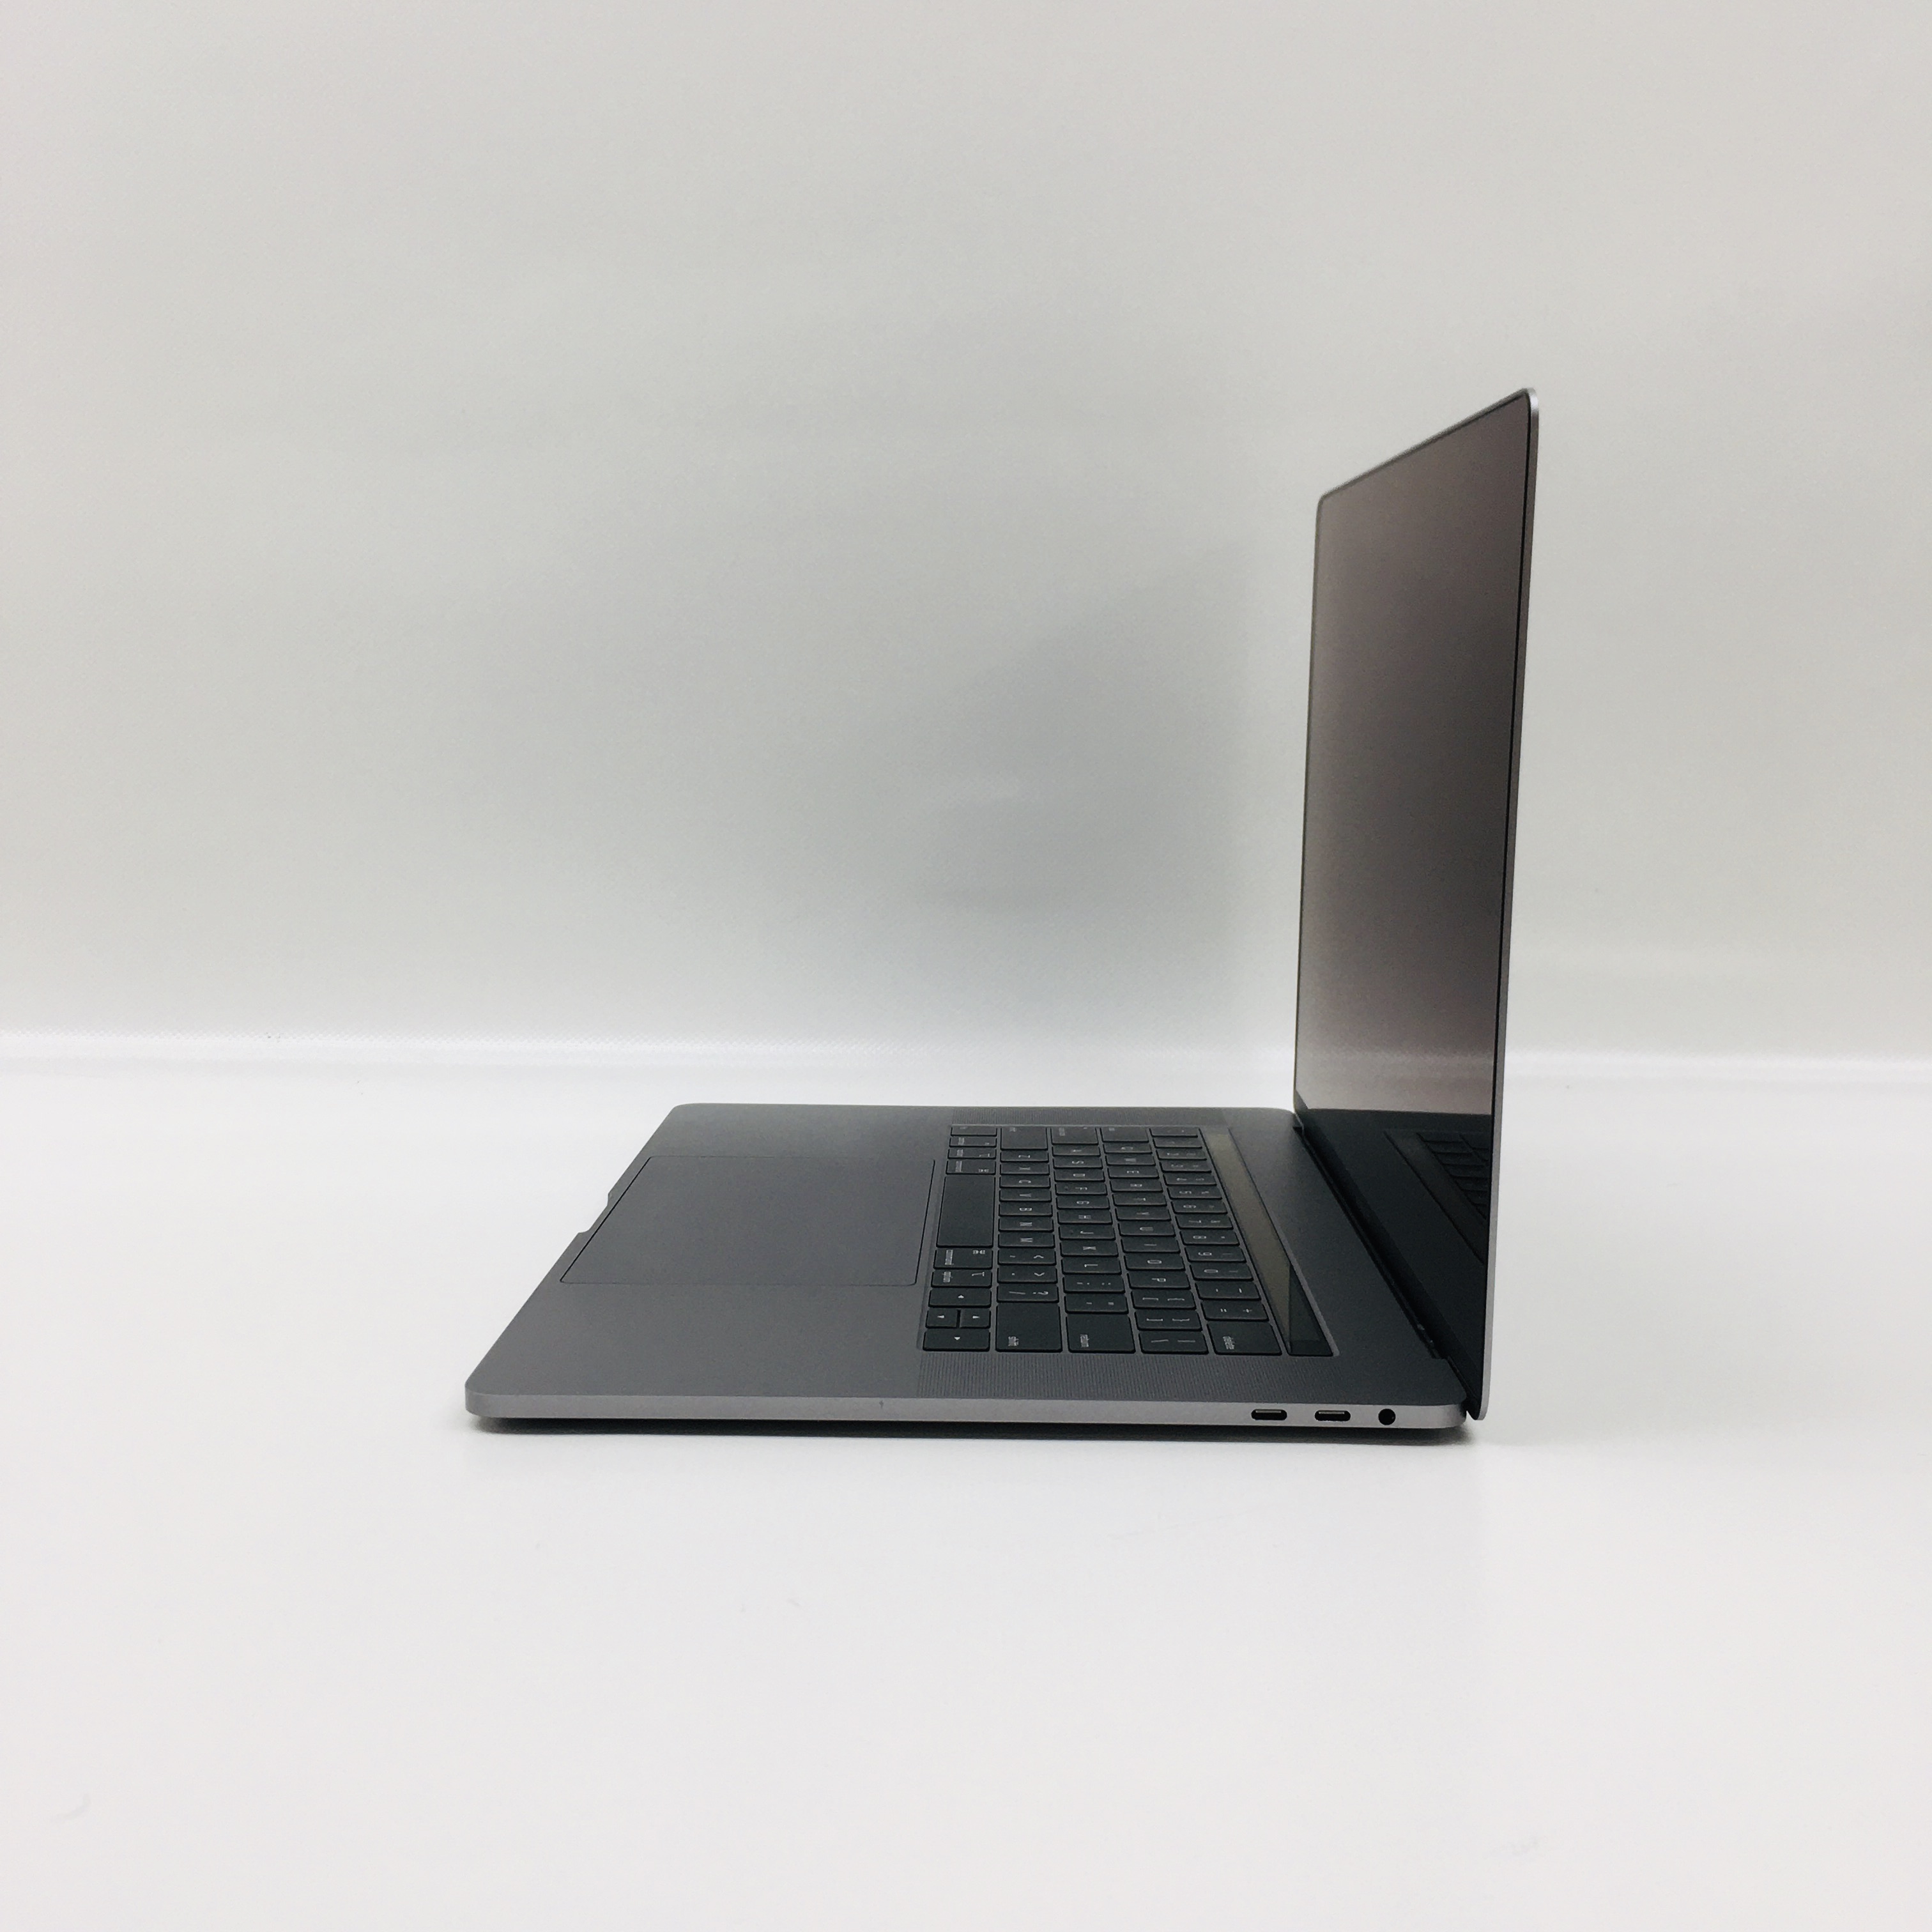 MacBook Pro 15" Touch Bar Mid 2018 (Intel 6-Core i7 2.6 GHz 16 GB RAM 512 GB SSD), Space Gray, Intel 6-Core i7 2.6 GHz, 16 GB RAM, 512 GB SSD, image 3